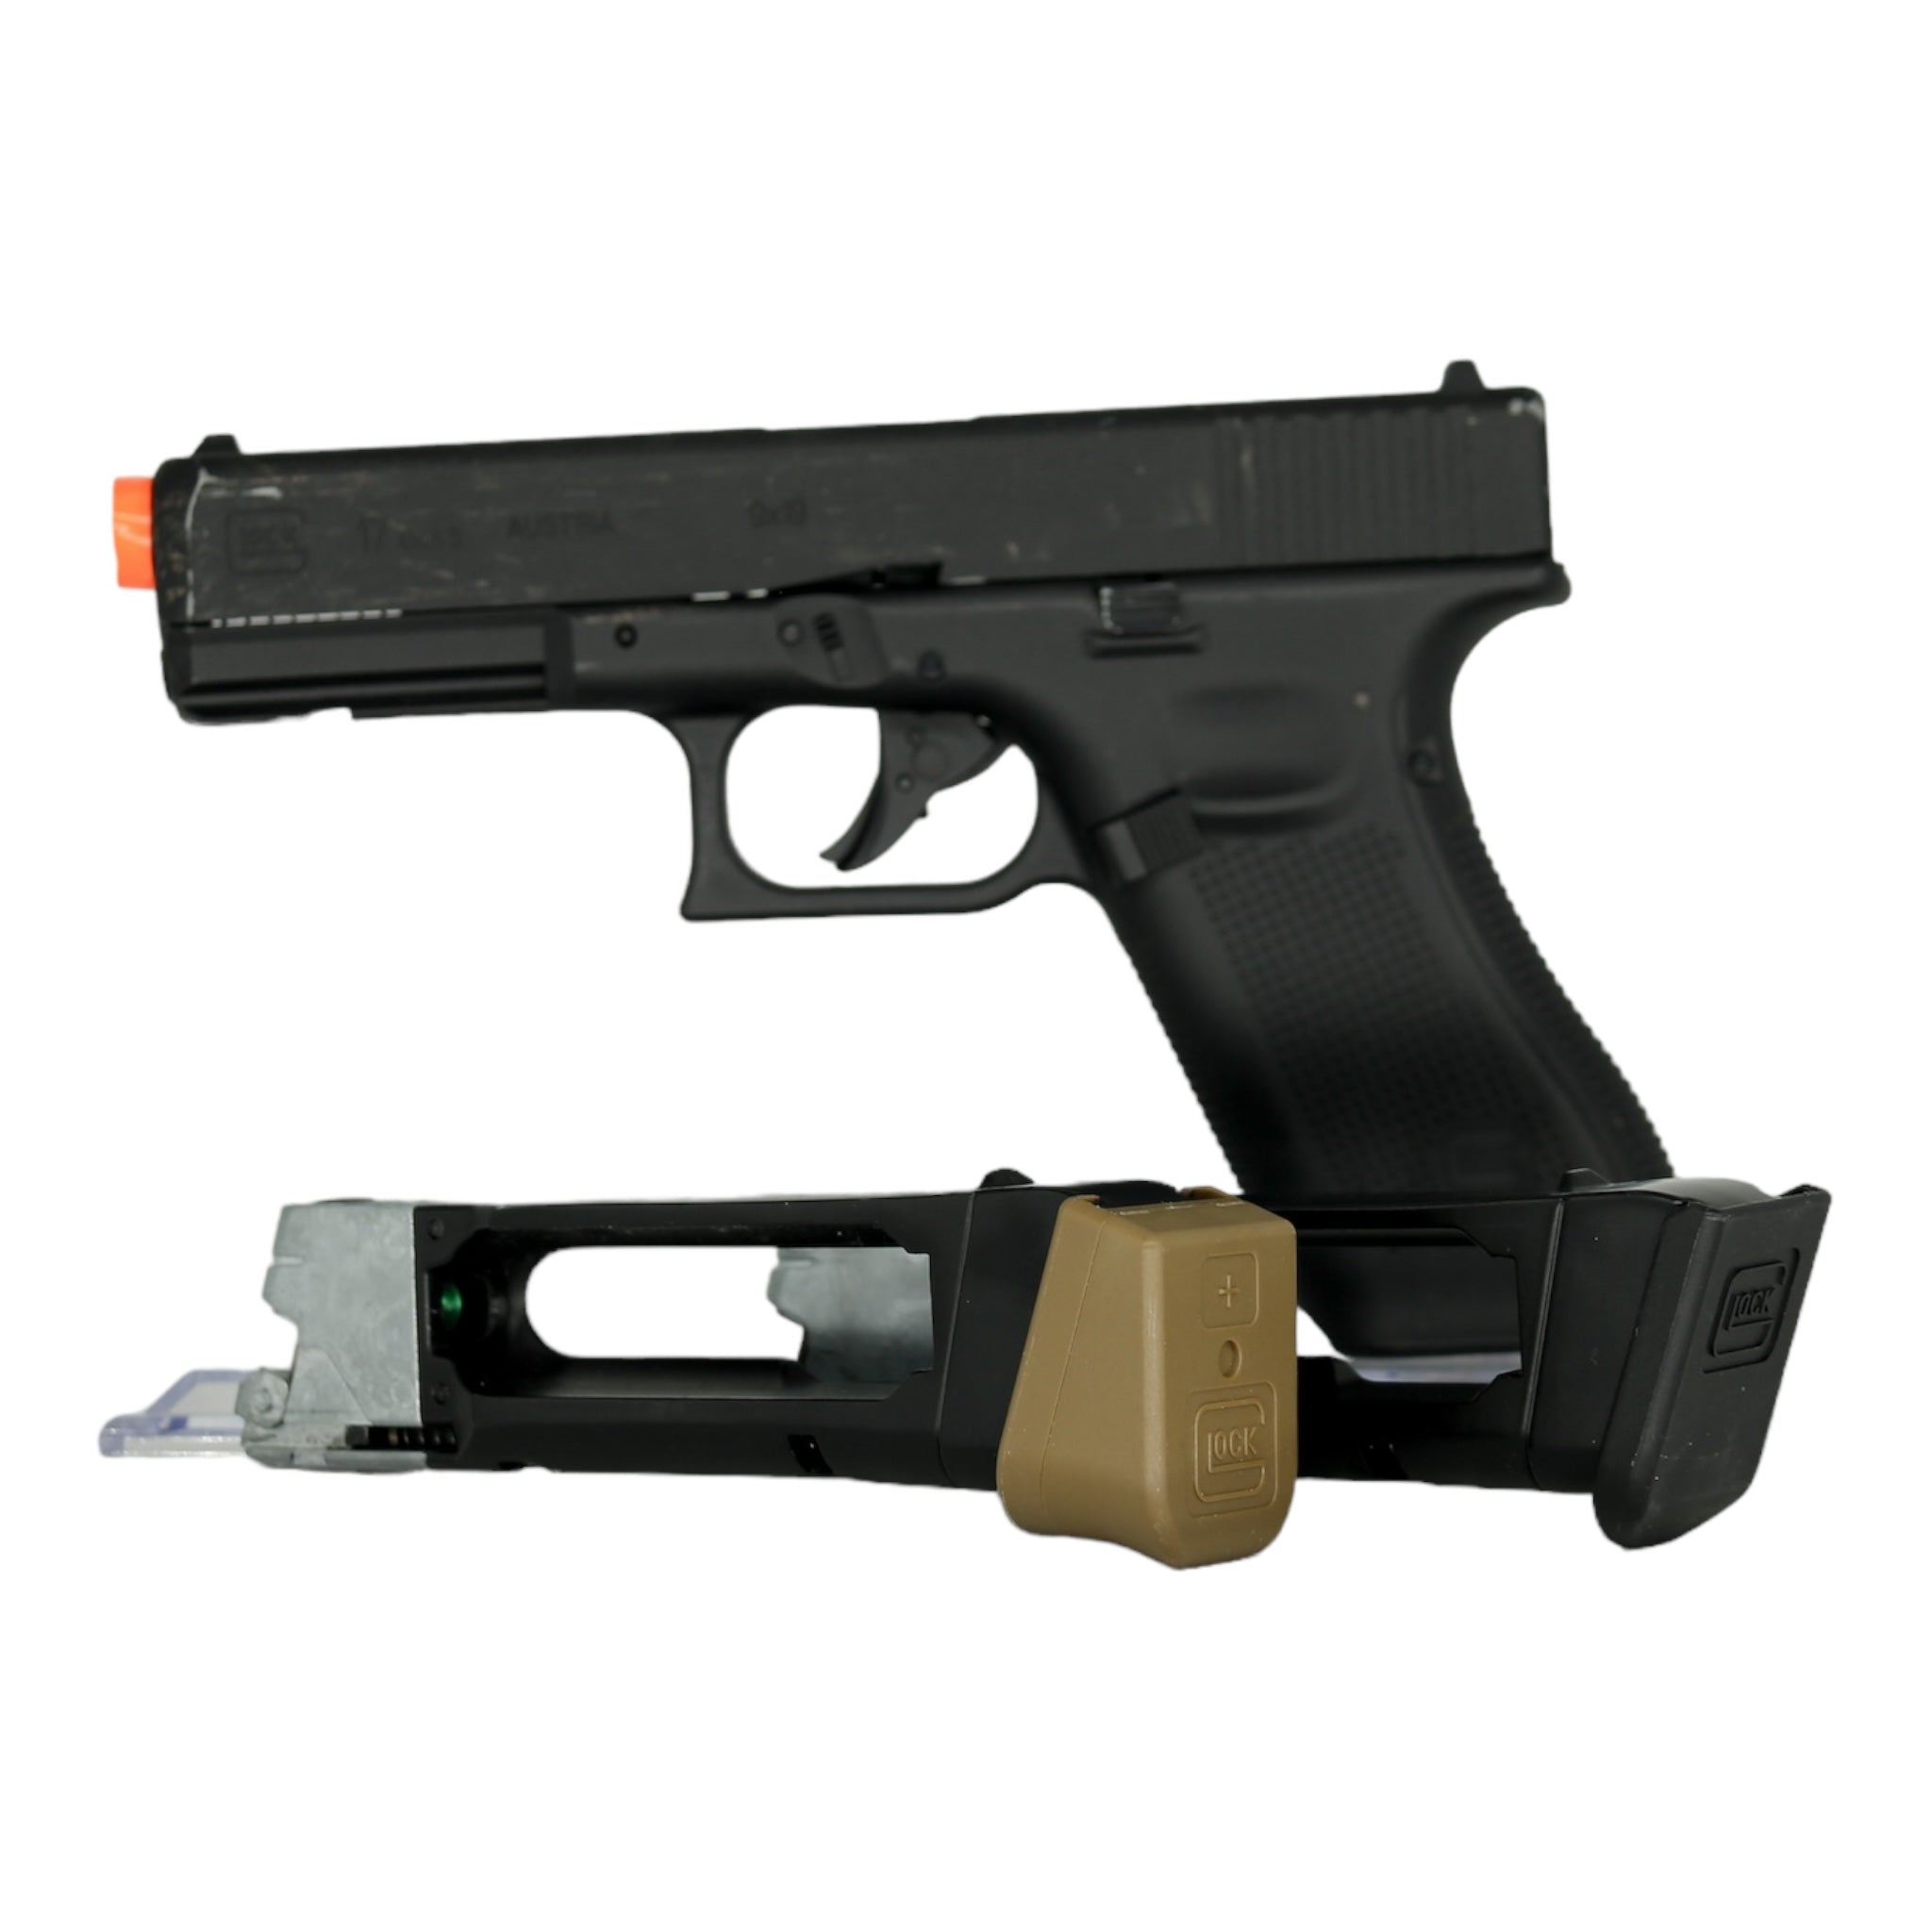 Pre-Owned GLOCK 17 GEN5 CO2 GBB Pistol w/ 2 Magazines - ssairsoft.com